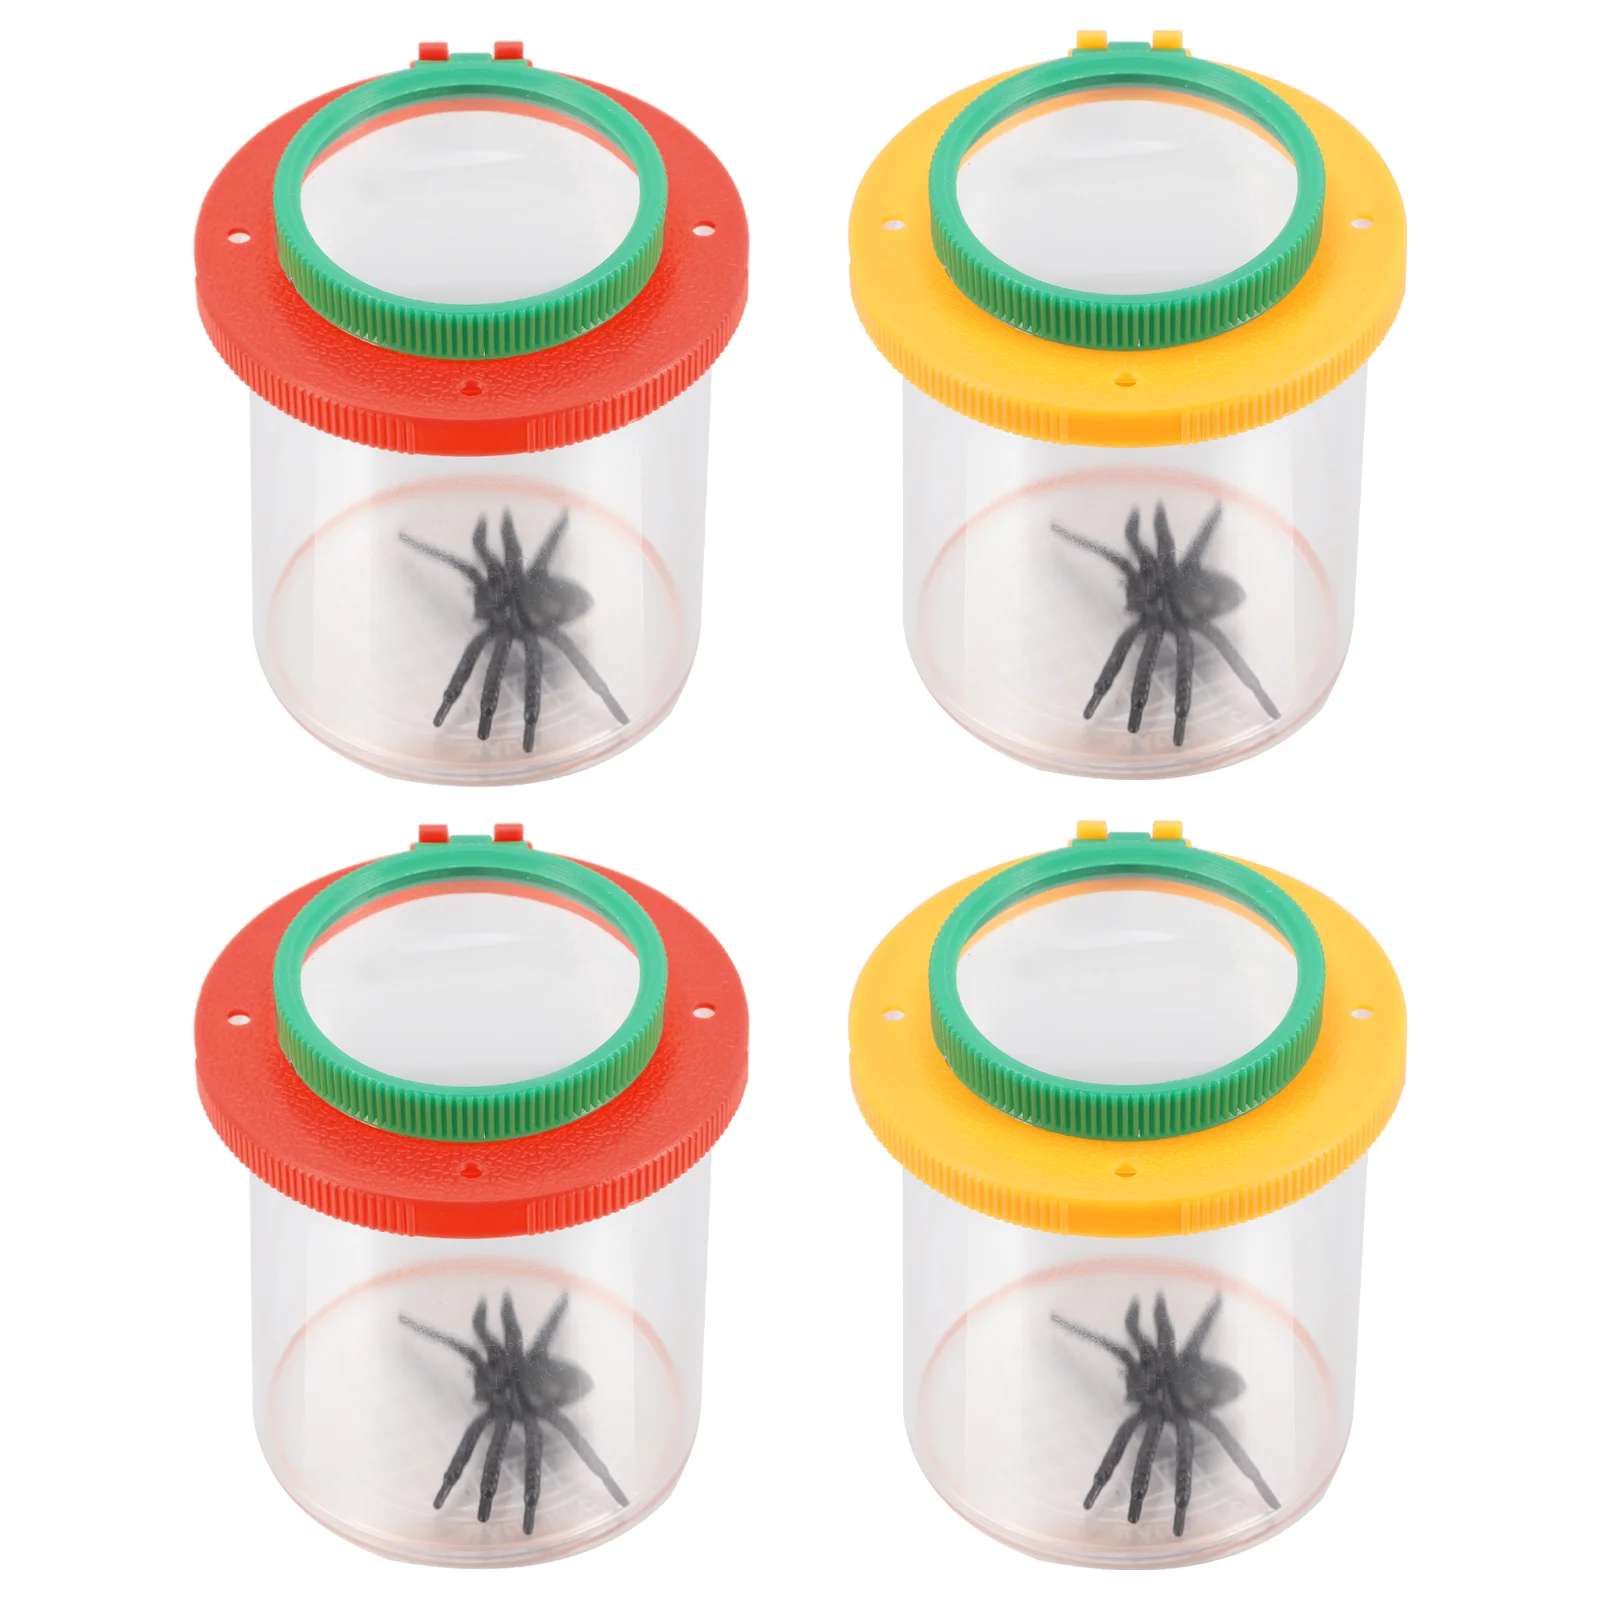 

4 Pcs Insect Viewer Teaching Apparatus Bug Cages Clear Plastic Containers Glass Observation Plastic Child